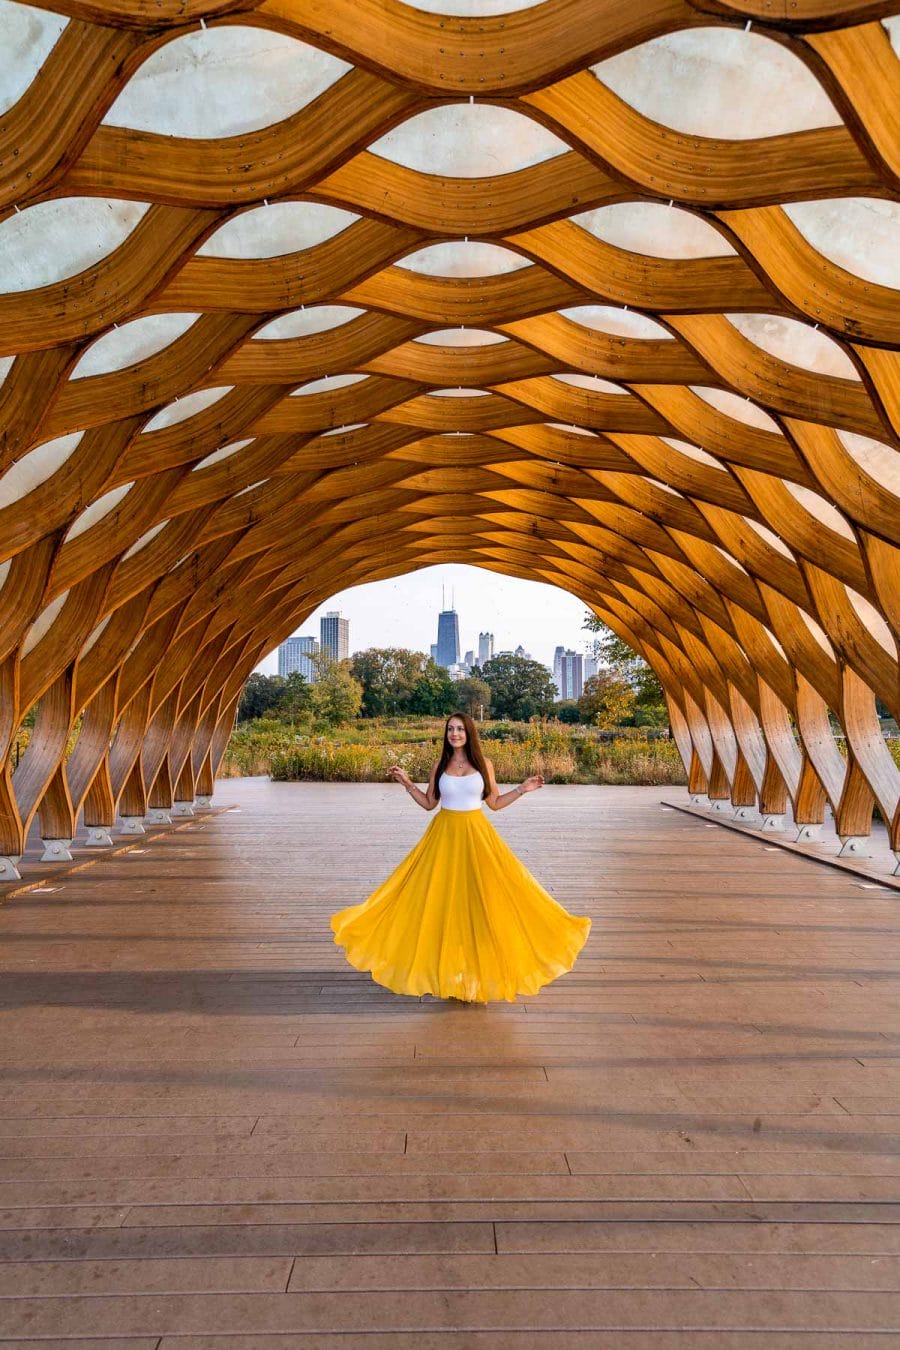 Girl in yellow dress at the Honeycomb in Chicago